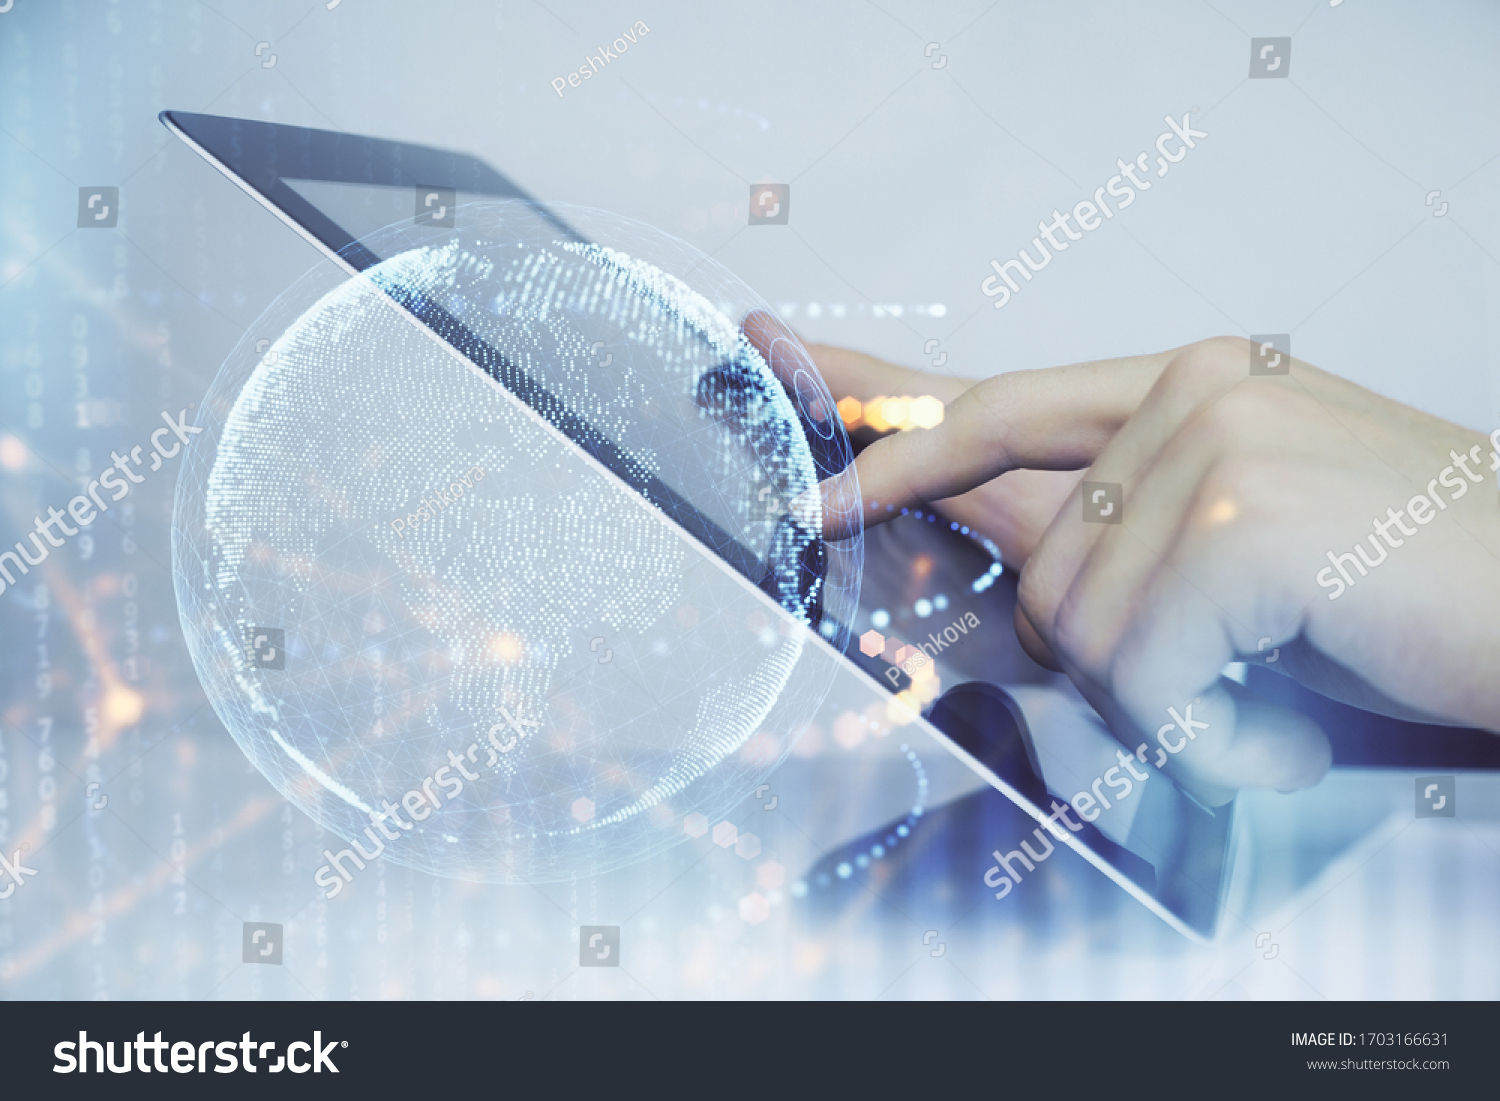 Multi exposure of man's hands holding and using a digital device and map drawing. International business concept. #1703166631